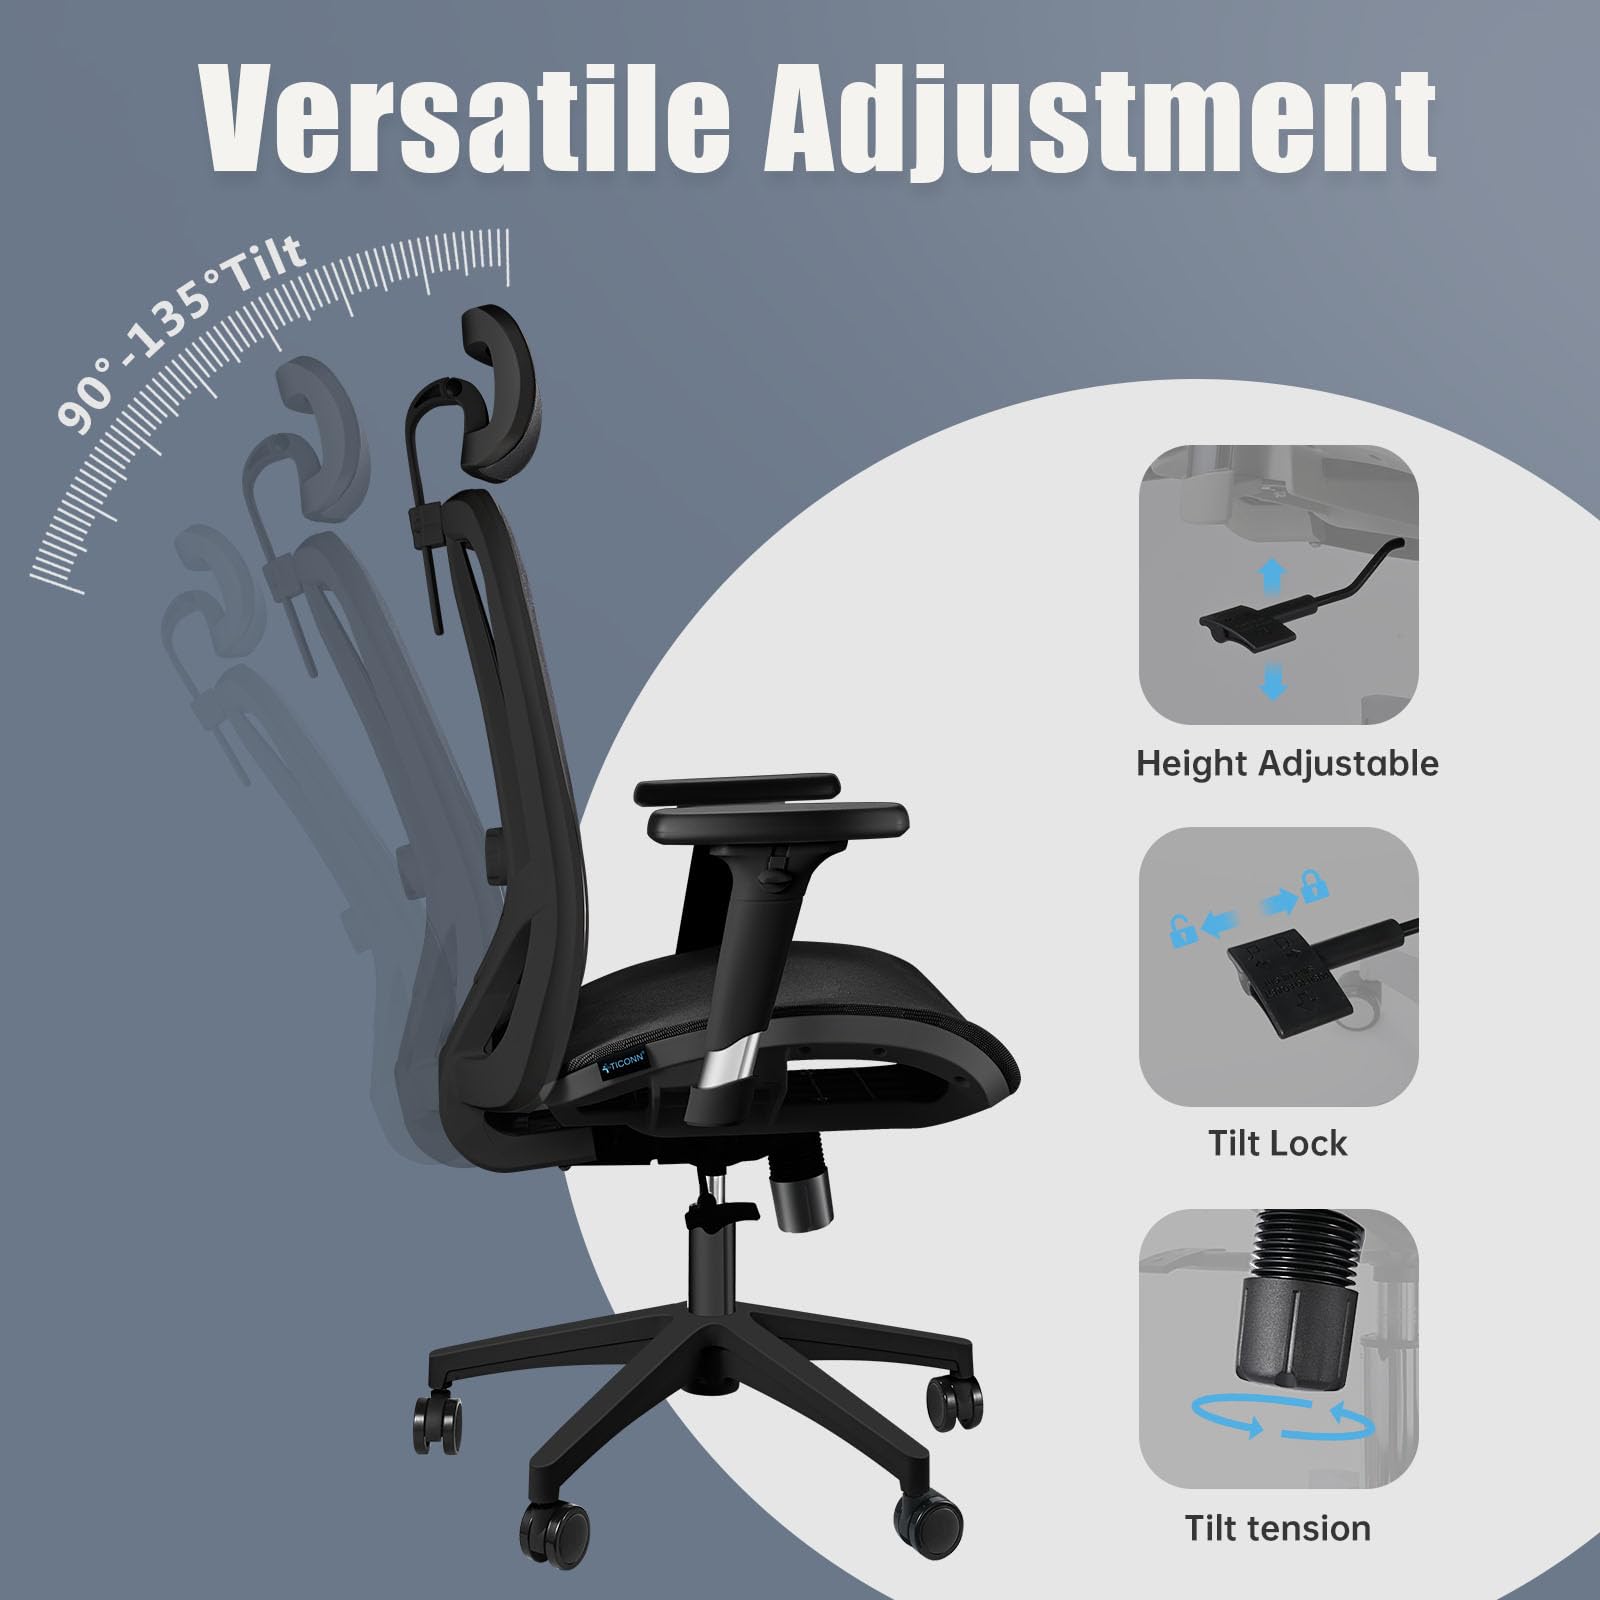 TICONN Big & Tall Ergonomic Office Chair, Home Office Desk Chairs with Wheels, Adjustable Headrest, 3D Adjustable Arm Rest, Lumbar Support (Black)